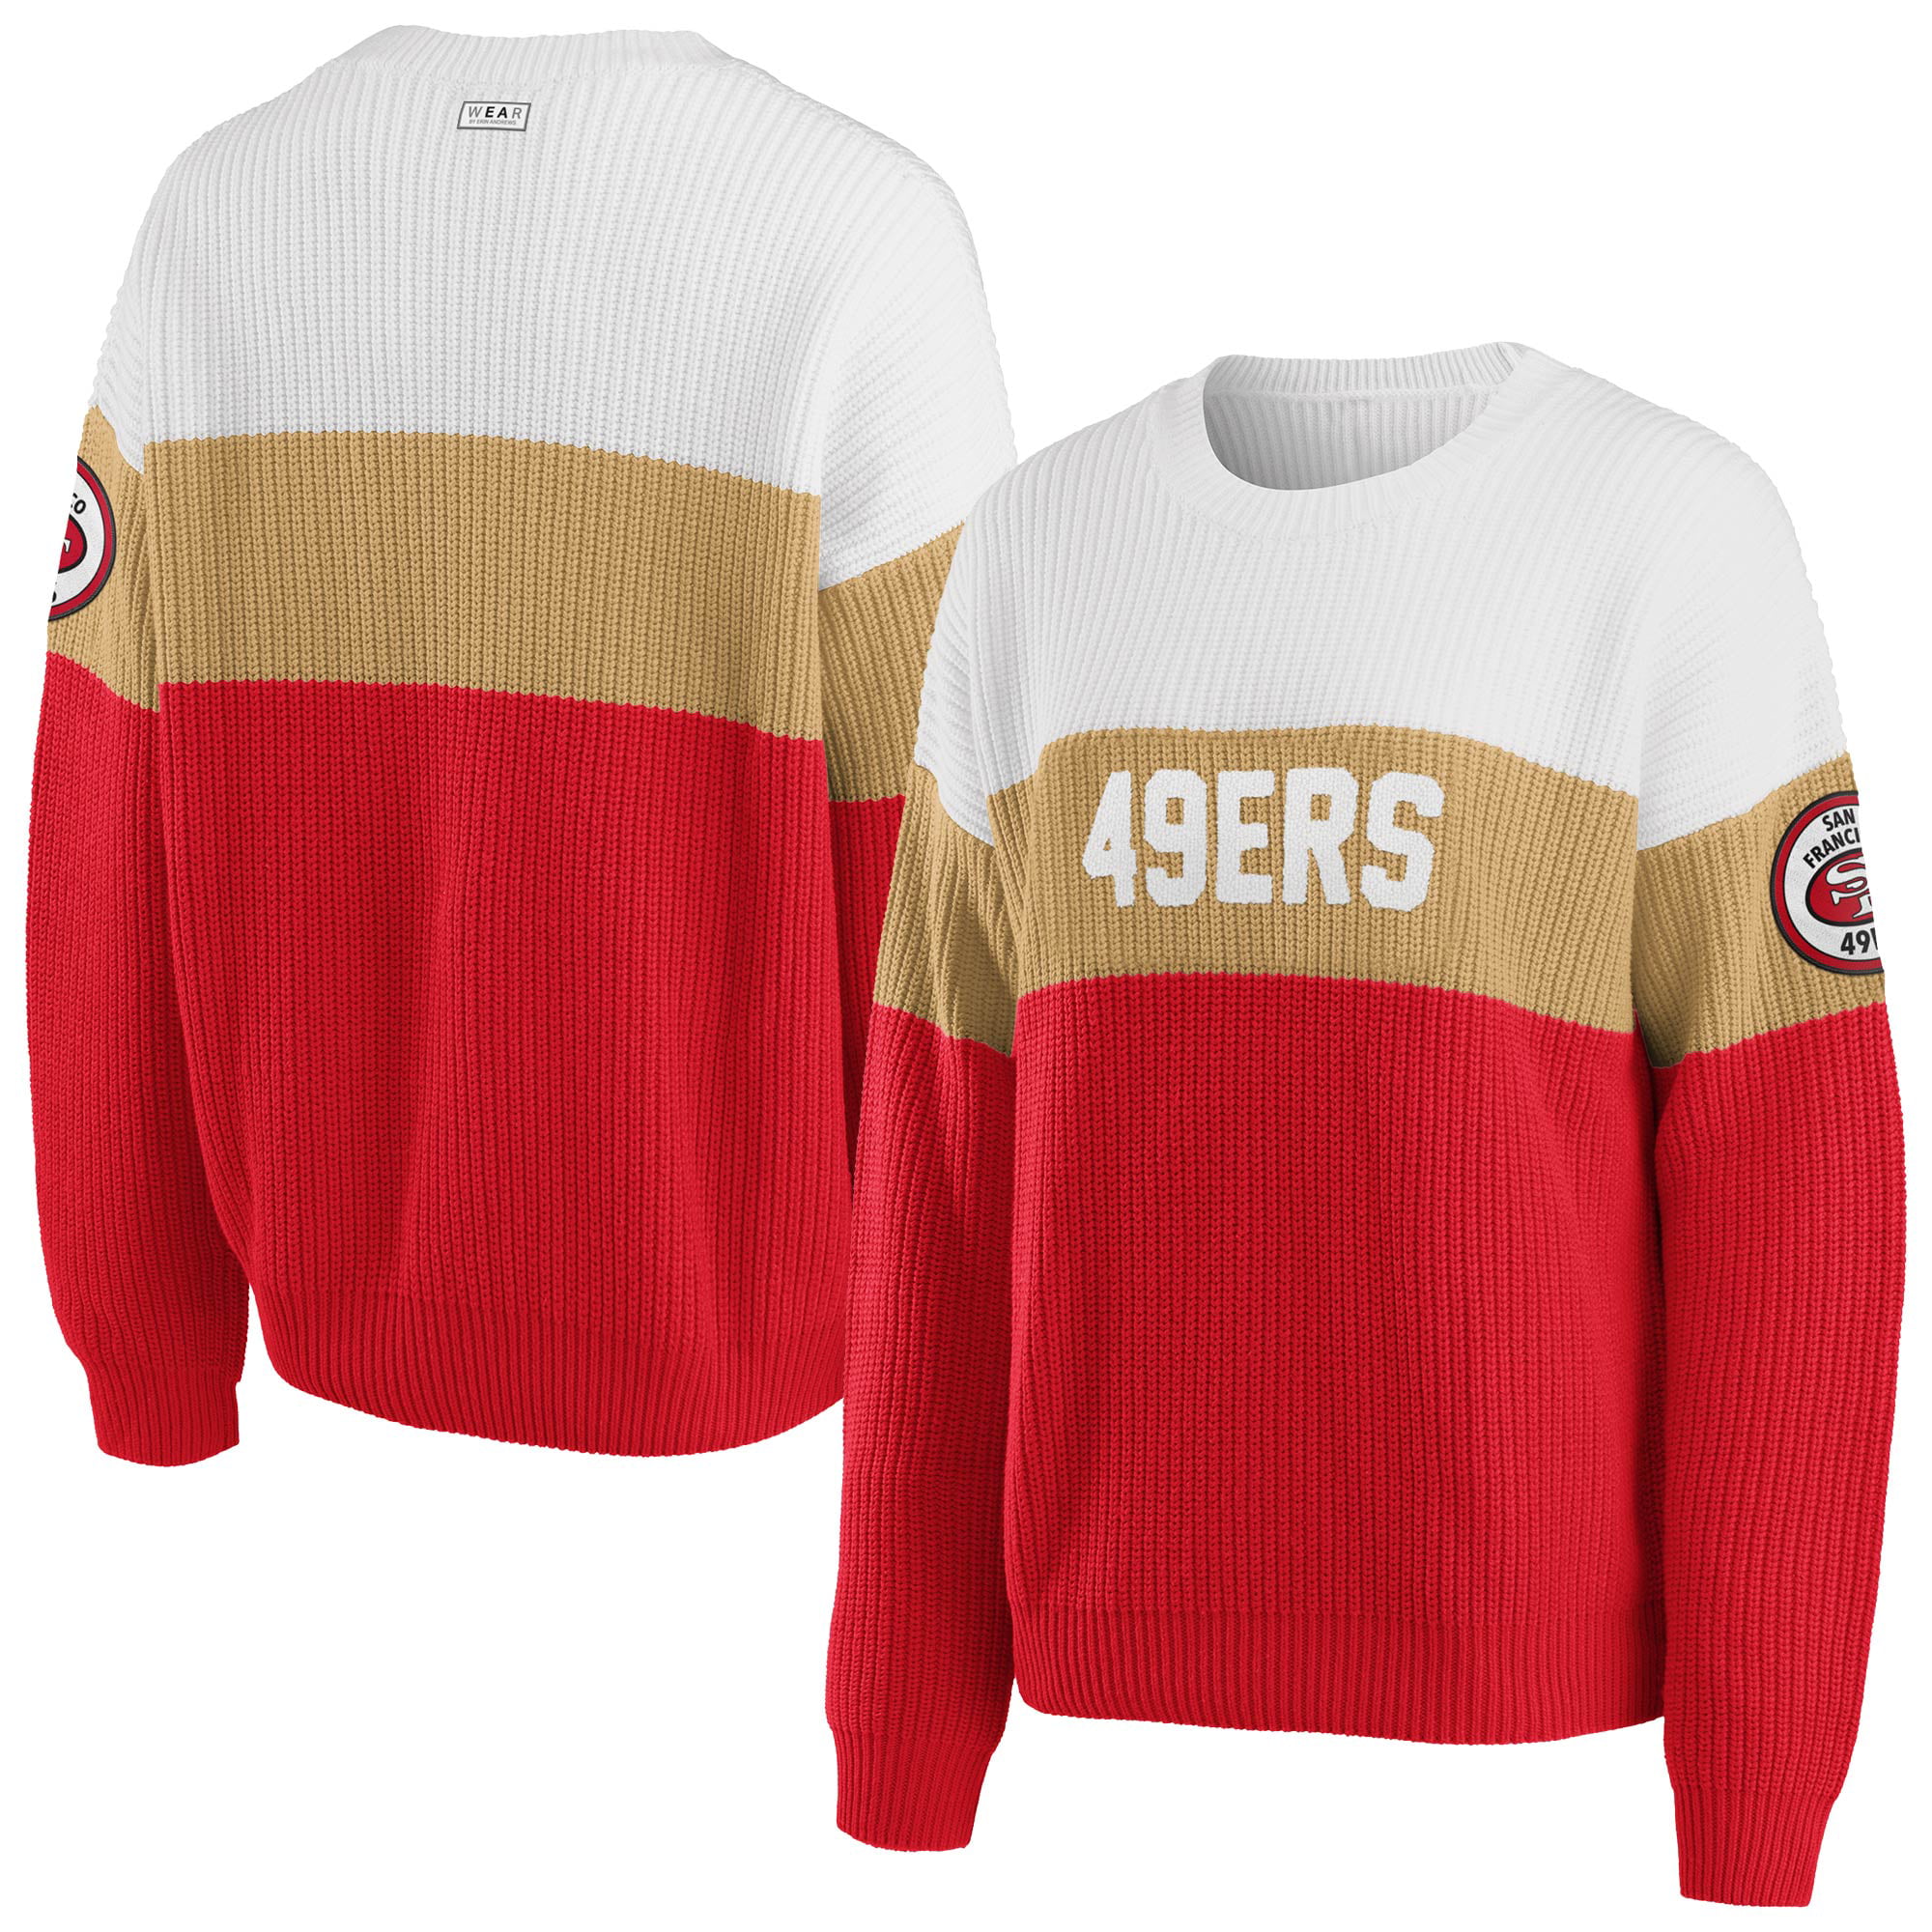 49ers jersey sweater